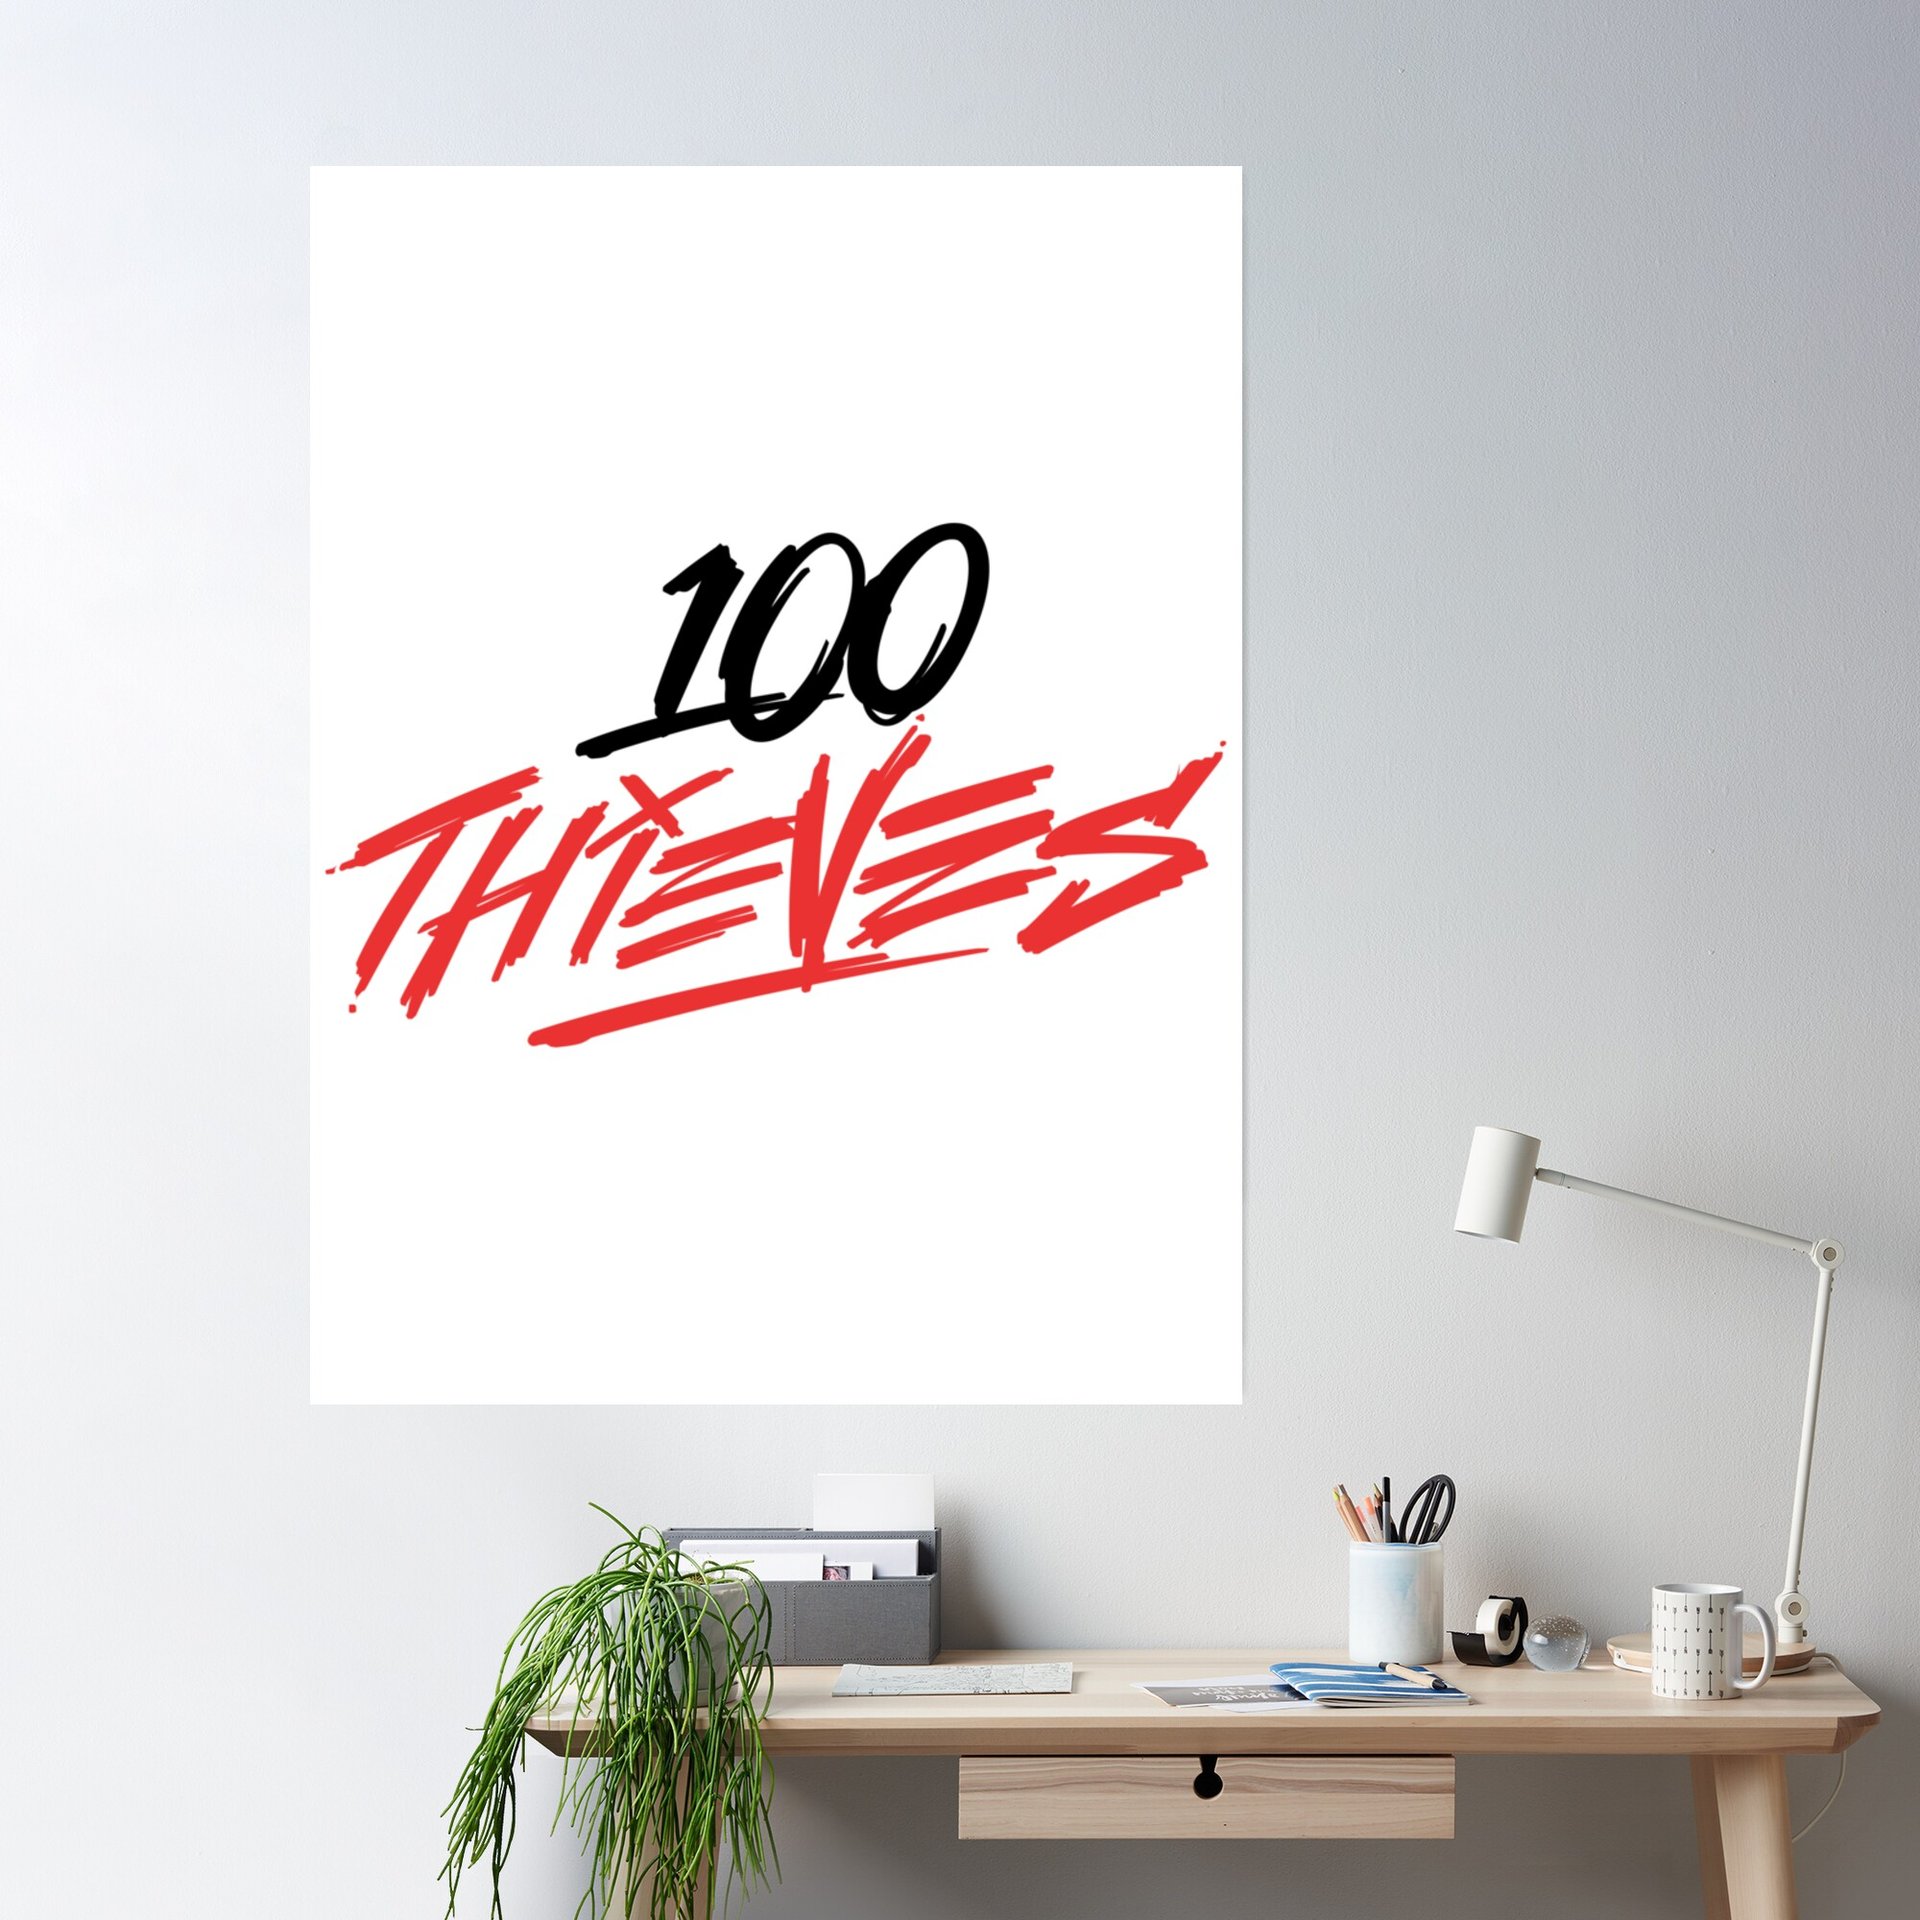 cposterlargesquare product2000x2000 10 - 100 Thieves Shop